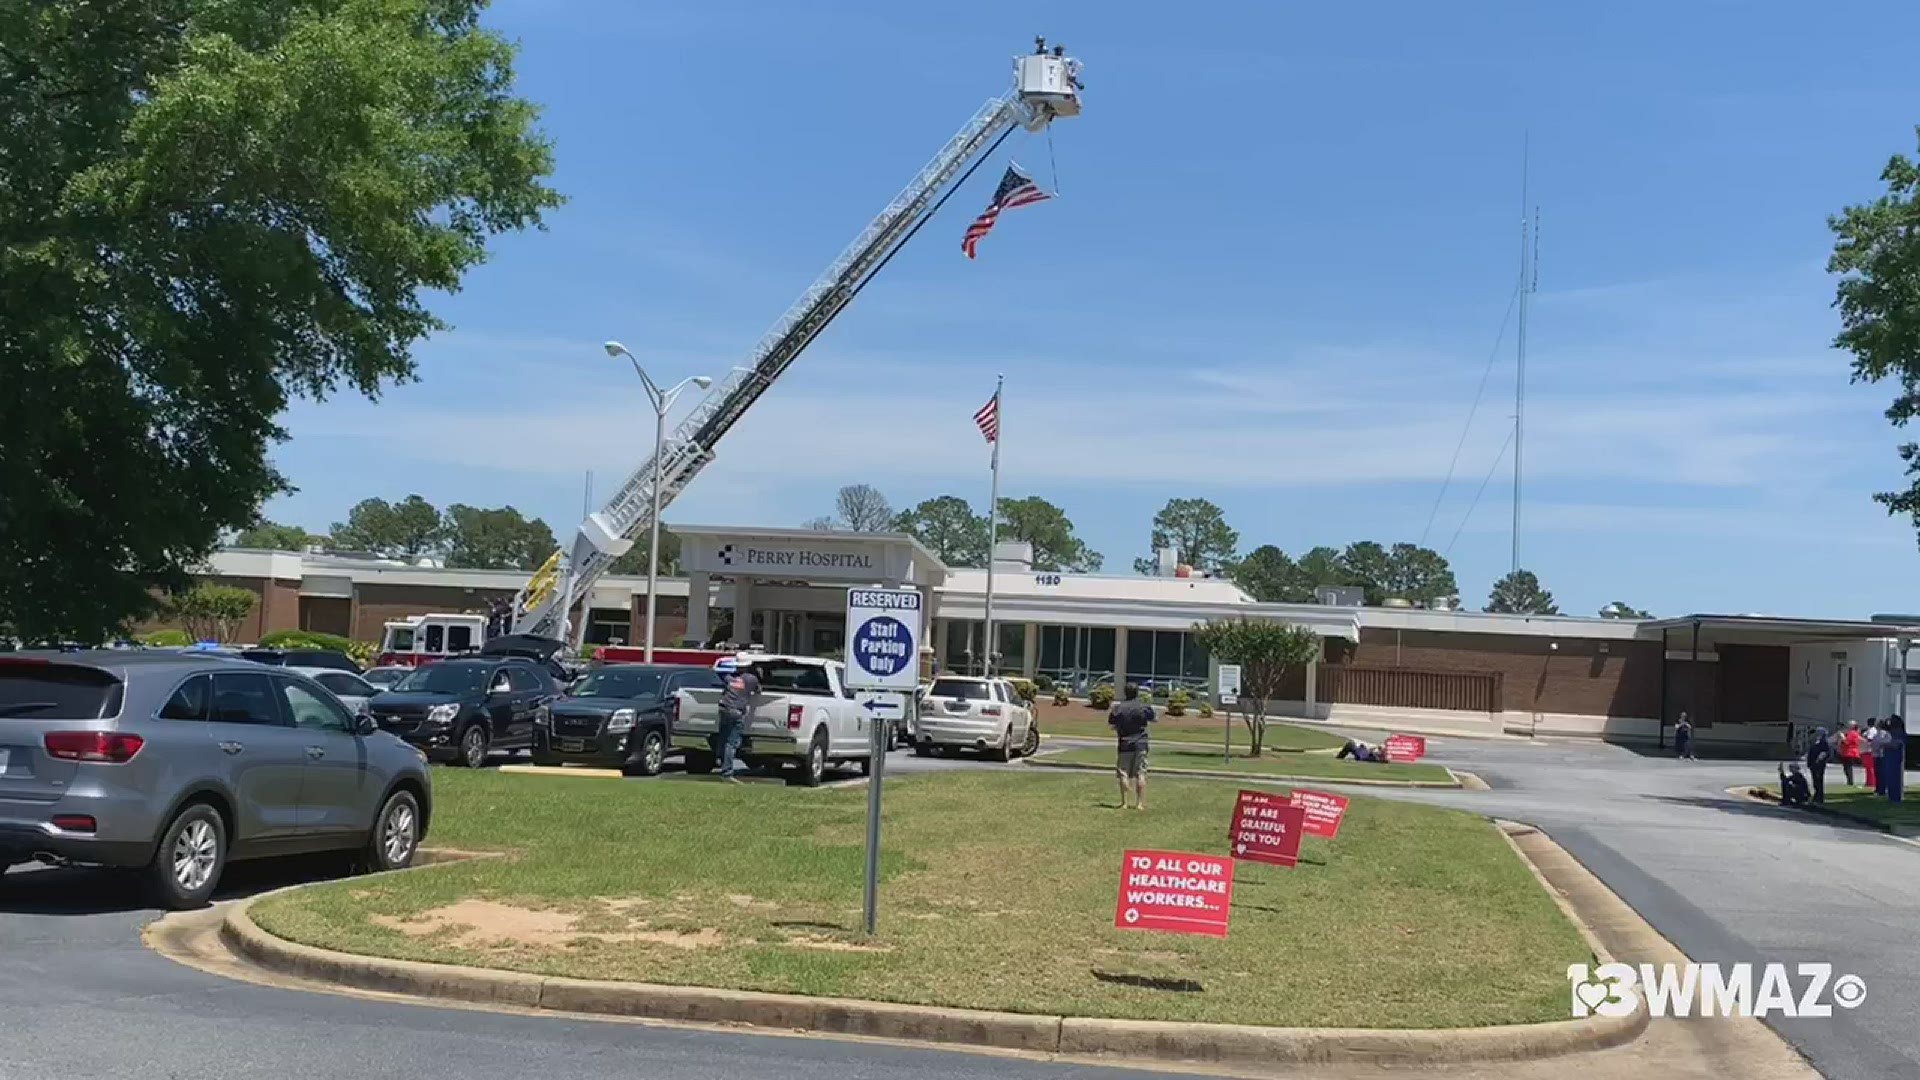 The fire department raised the American flag and healthcare workers gathered outside the hospital.